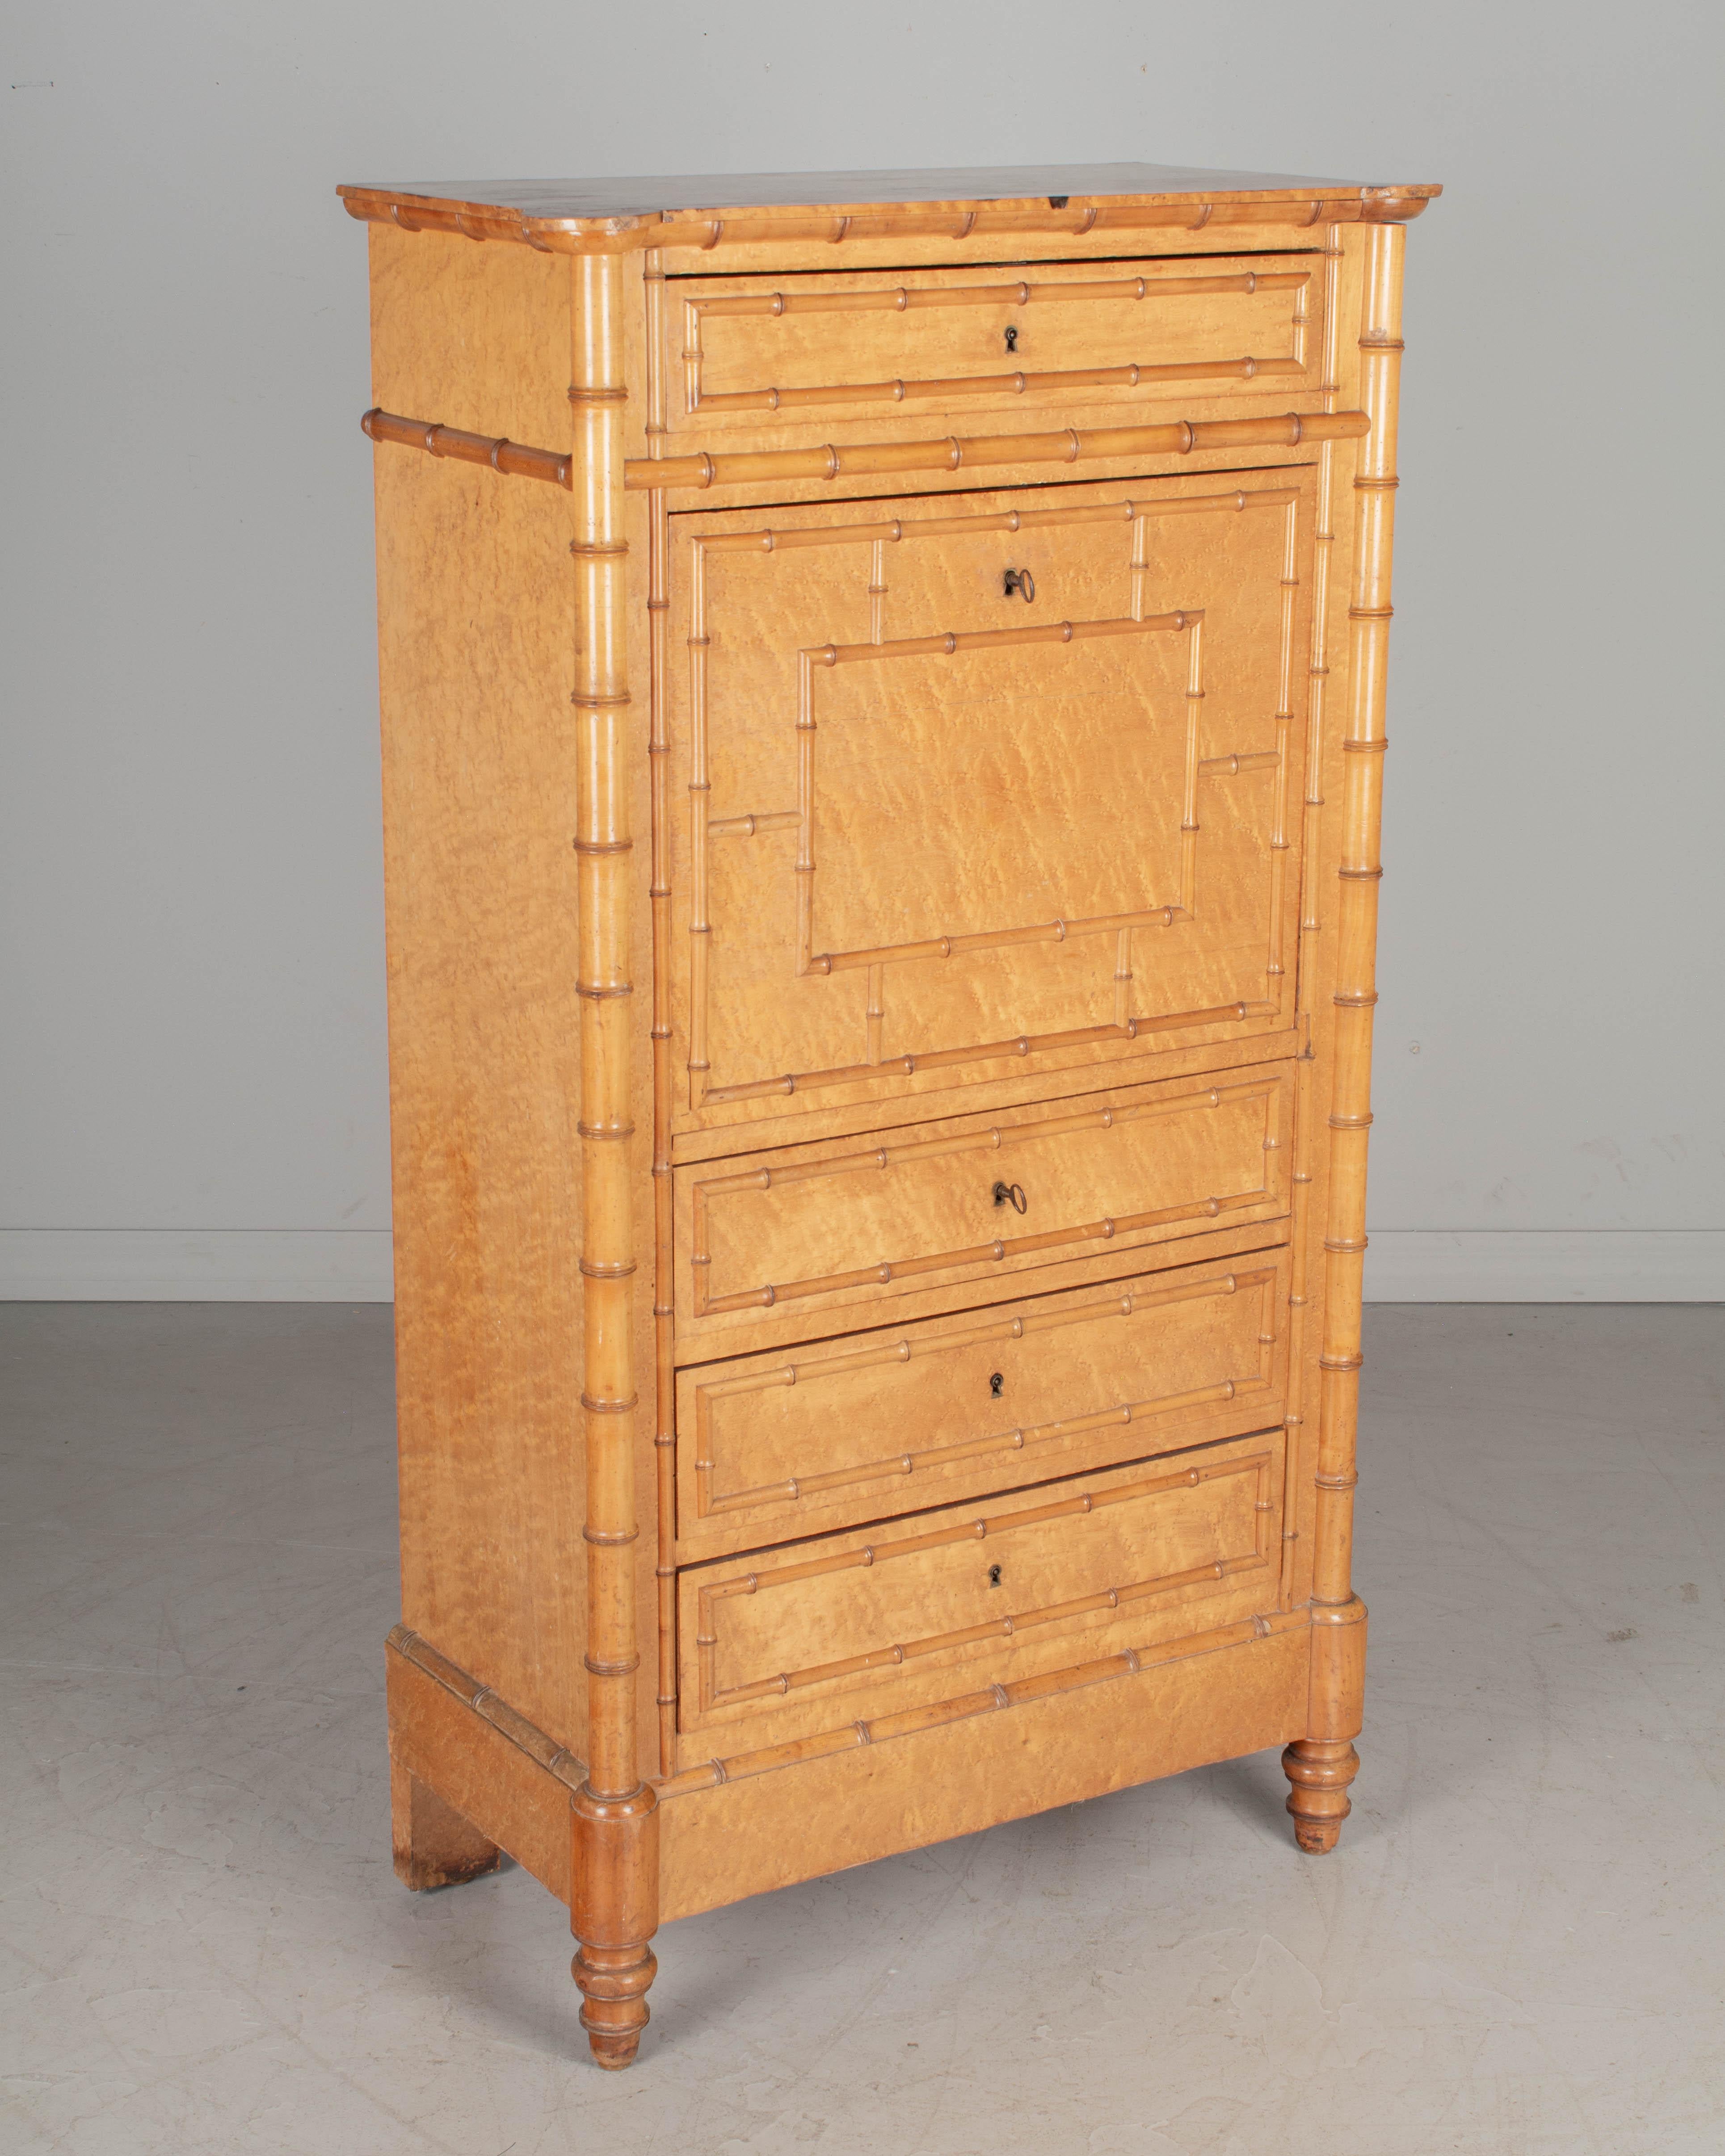 A French secrétaire à abattant, or drop front secretary desk, with the case made of birdseye maple veneer over solid oak and the faux bamboo details made of turned cherry wood. Four dovetailed drawers with working locks and two keys. Interior has